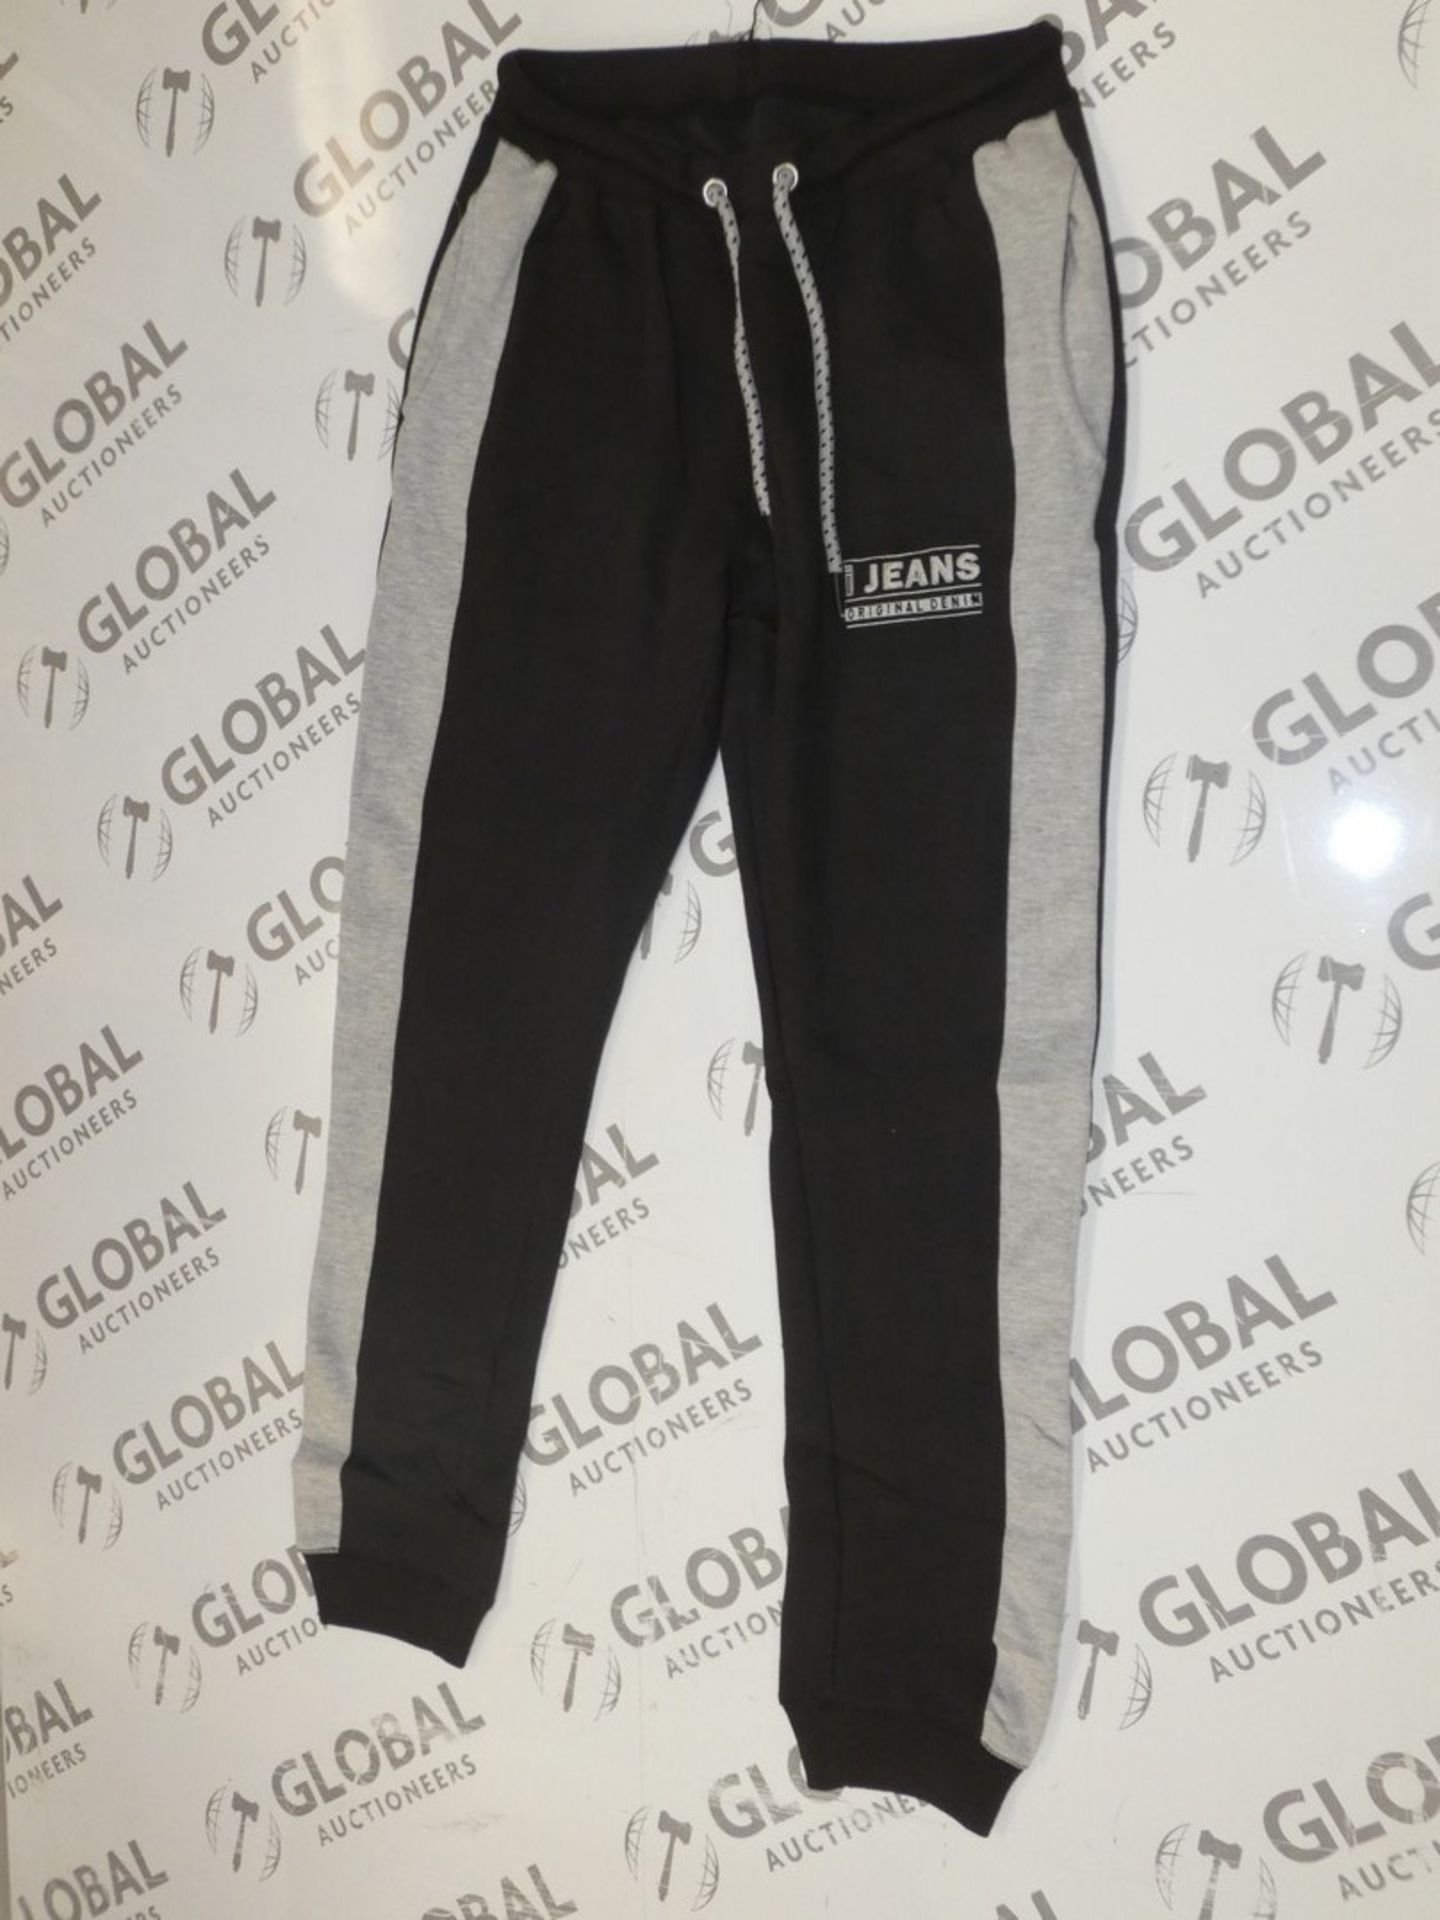 Brand New Pairs Of IJeans Original Black And Grey Gents Sports Fit Pants RRP £24.99 A Pair (476)